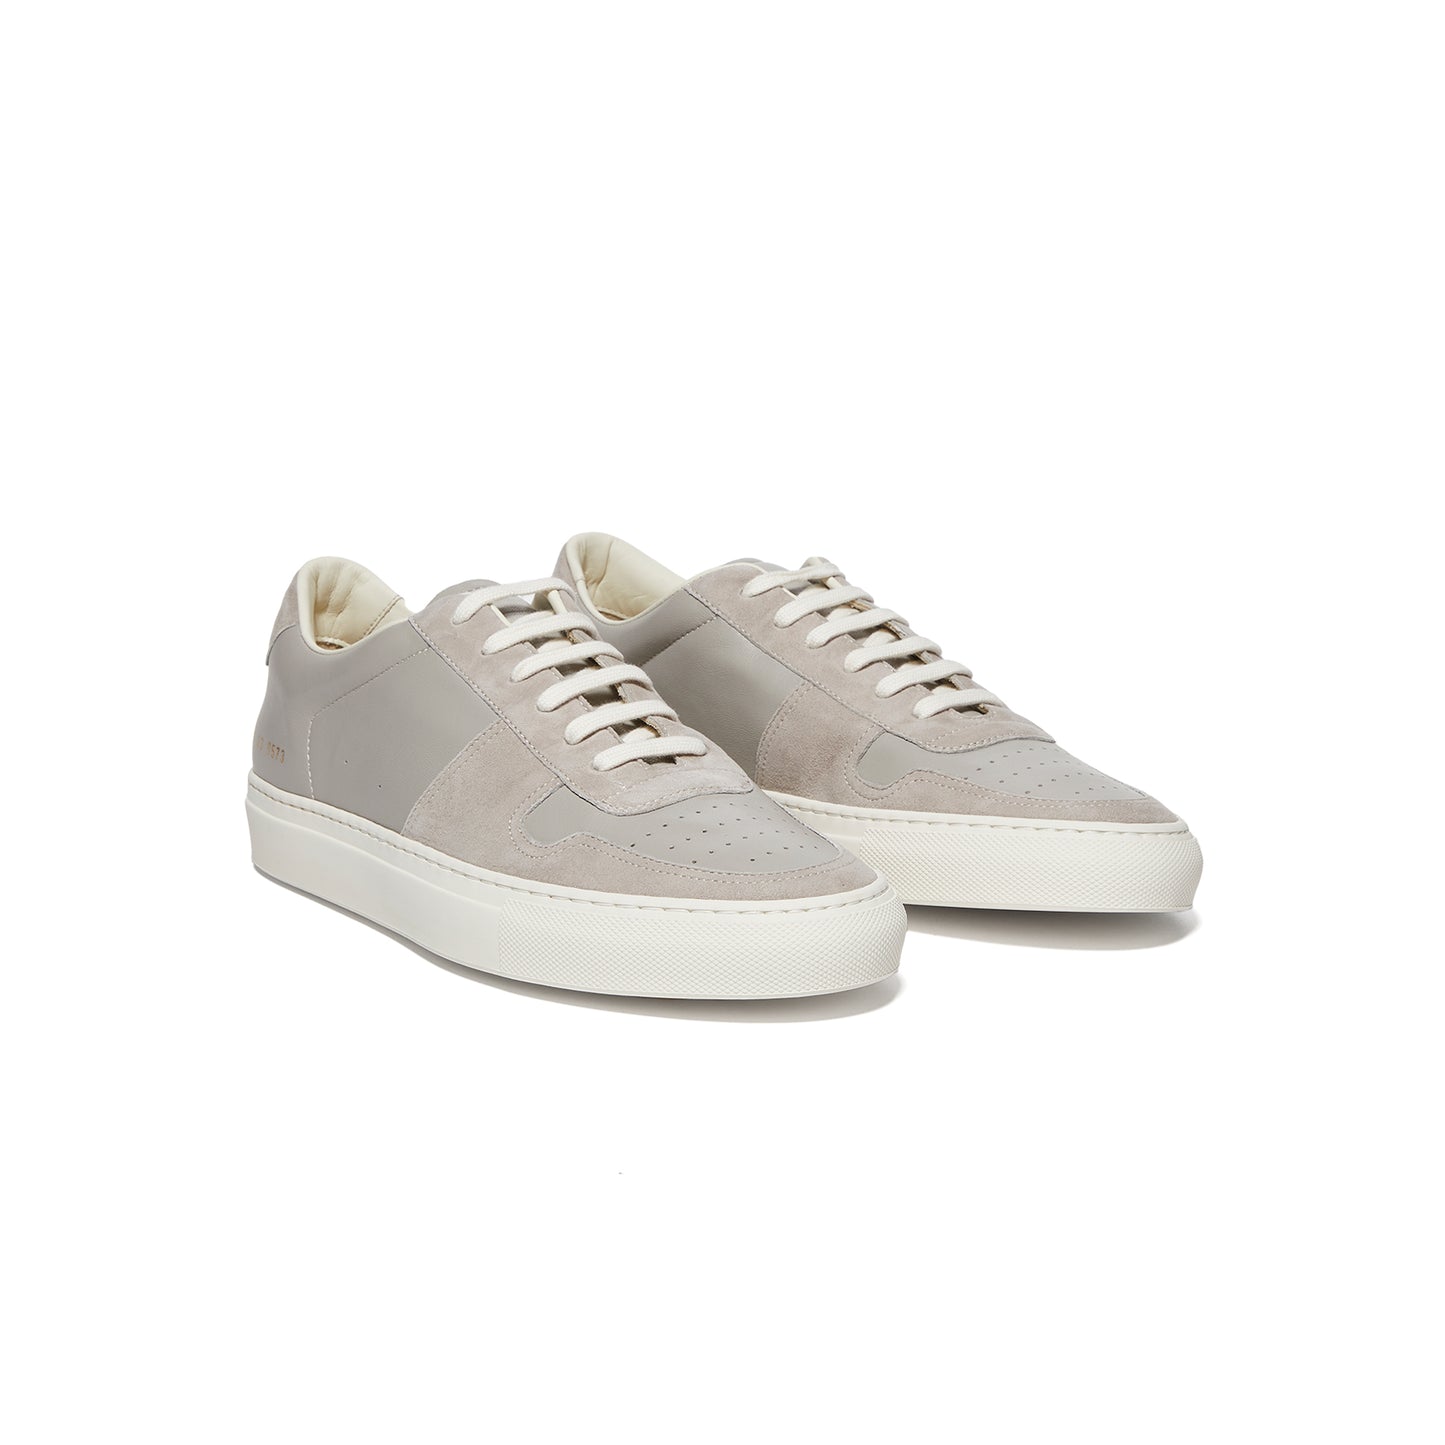 Common Projects Bball Duo (Light Grey)